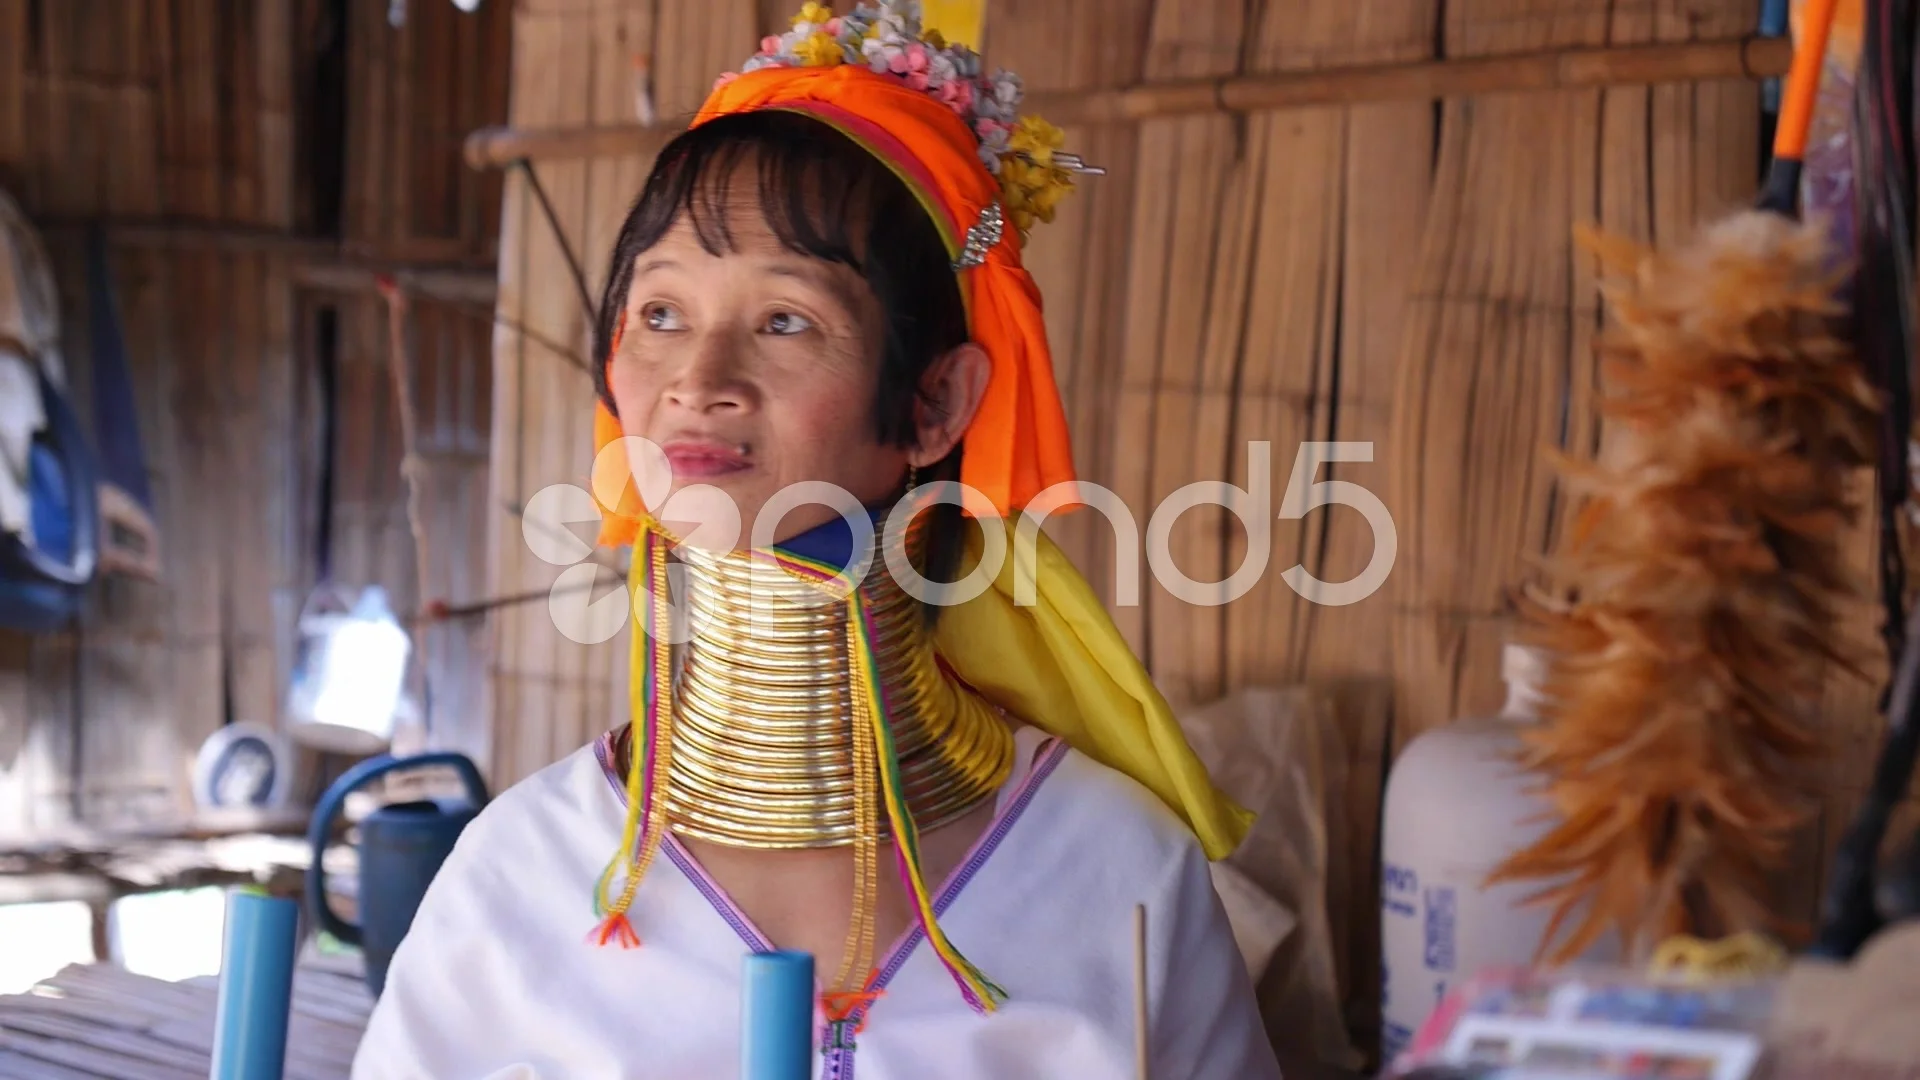 Neck Elongating Still Practiced Within This Indigenous Tribe - Medical Bag